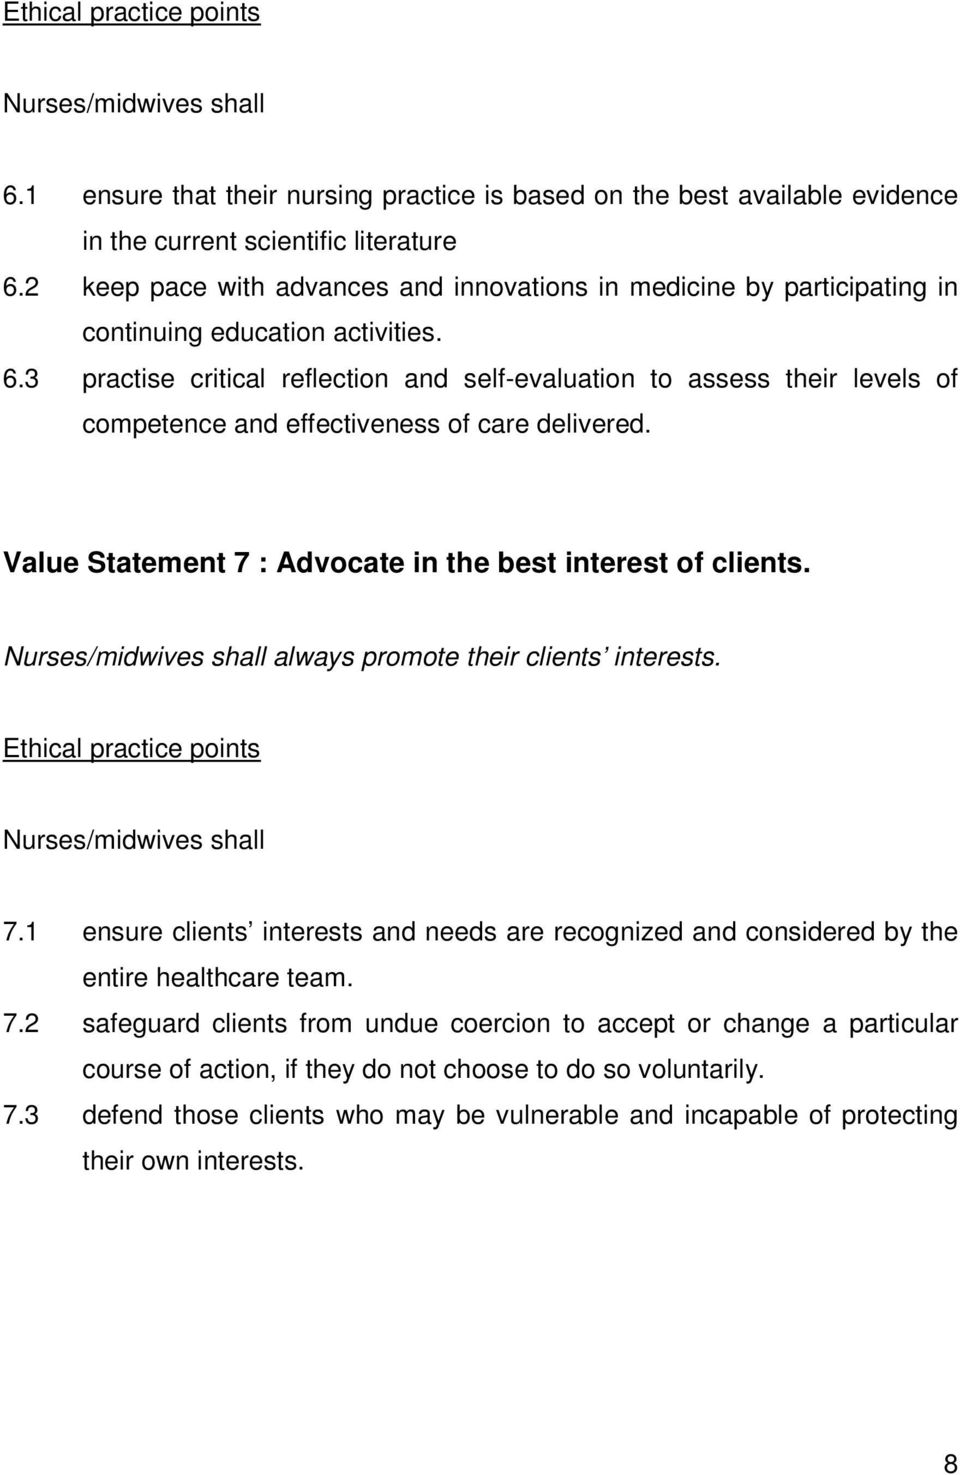 3 practise critical reflection and self-evaluation to assess their levels of competence and effectiveness of care delivered. Value Statement 7 : Advocate in the best interest of clients.